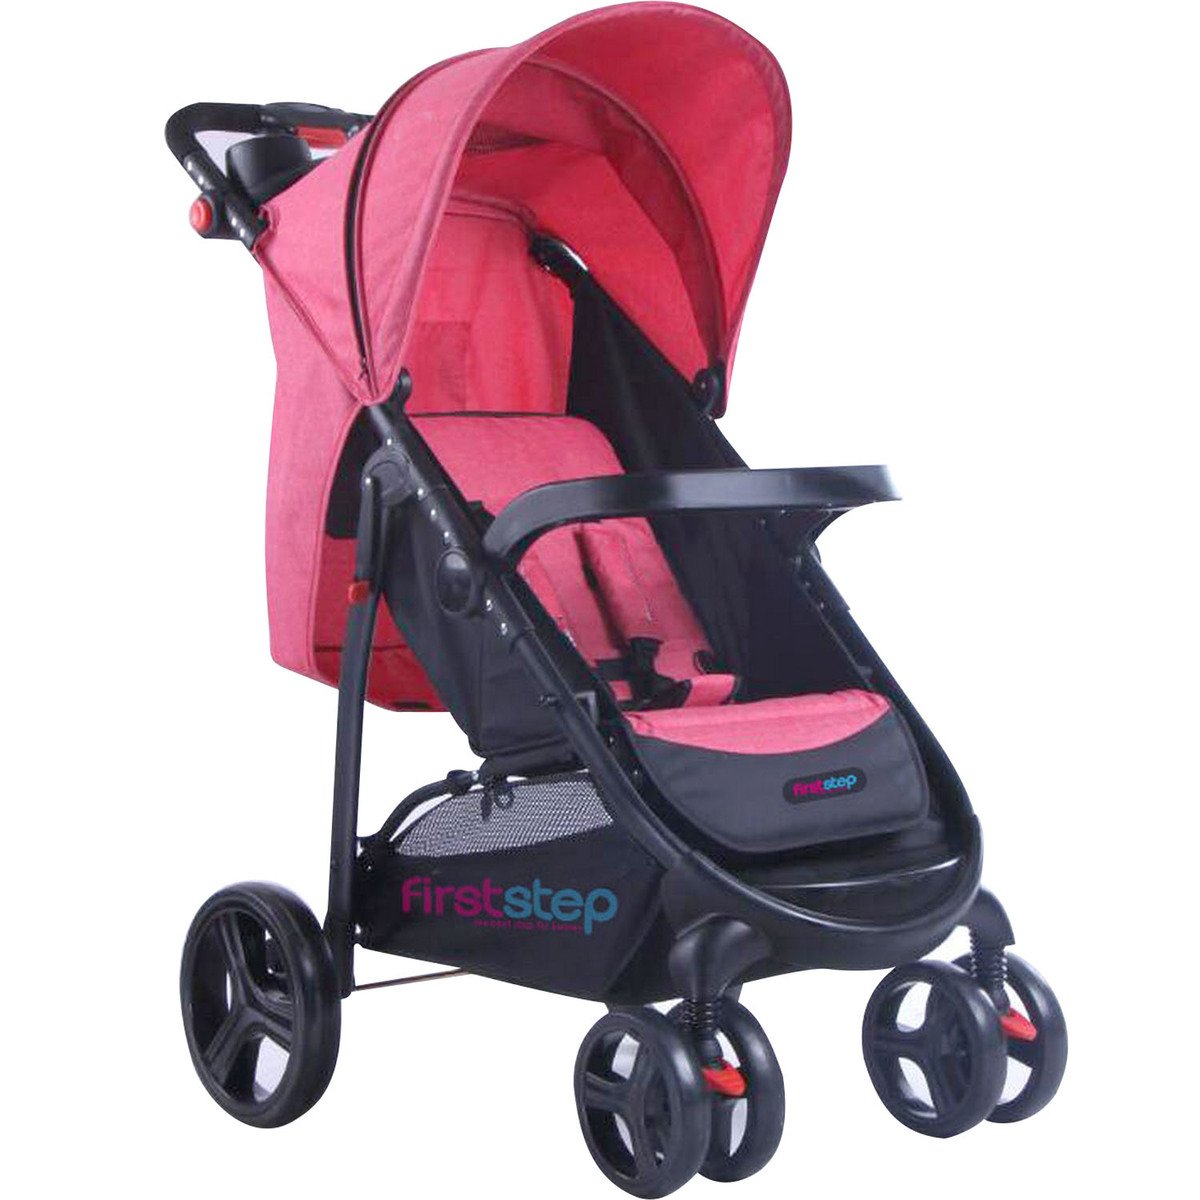 First Step Baby Stroller KDD-6798G Assorted Color